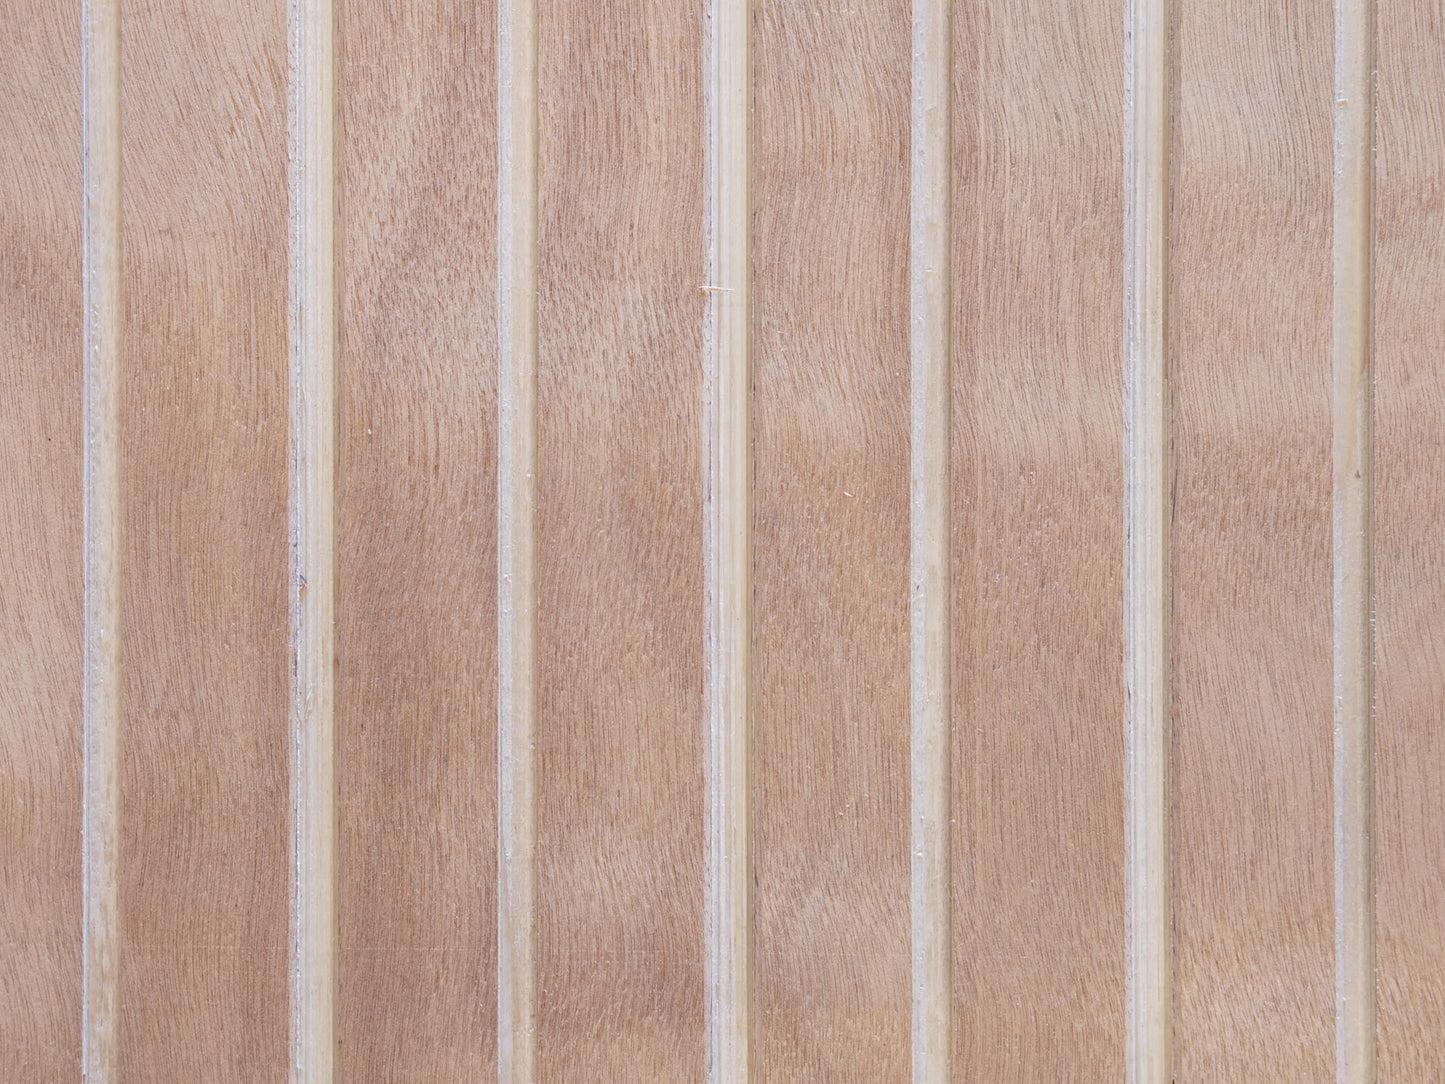 Close up of the Wideline pattern sample offered by Vintage Plywood Millworks